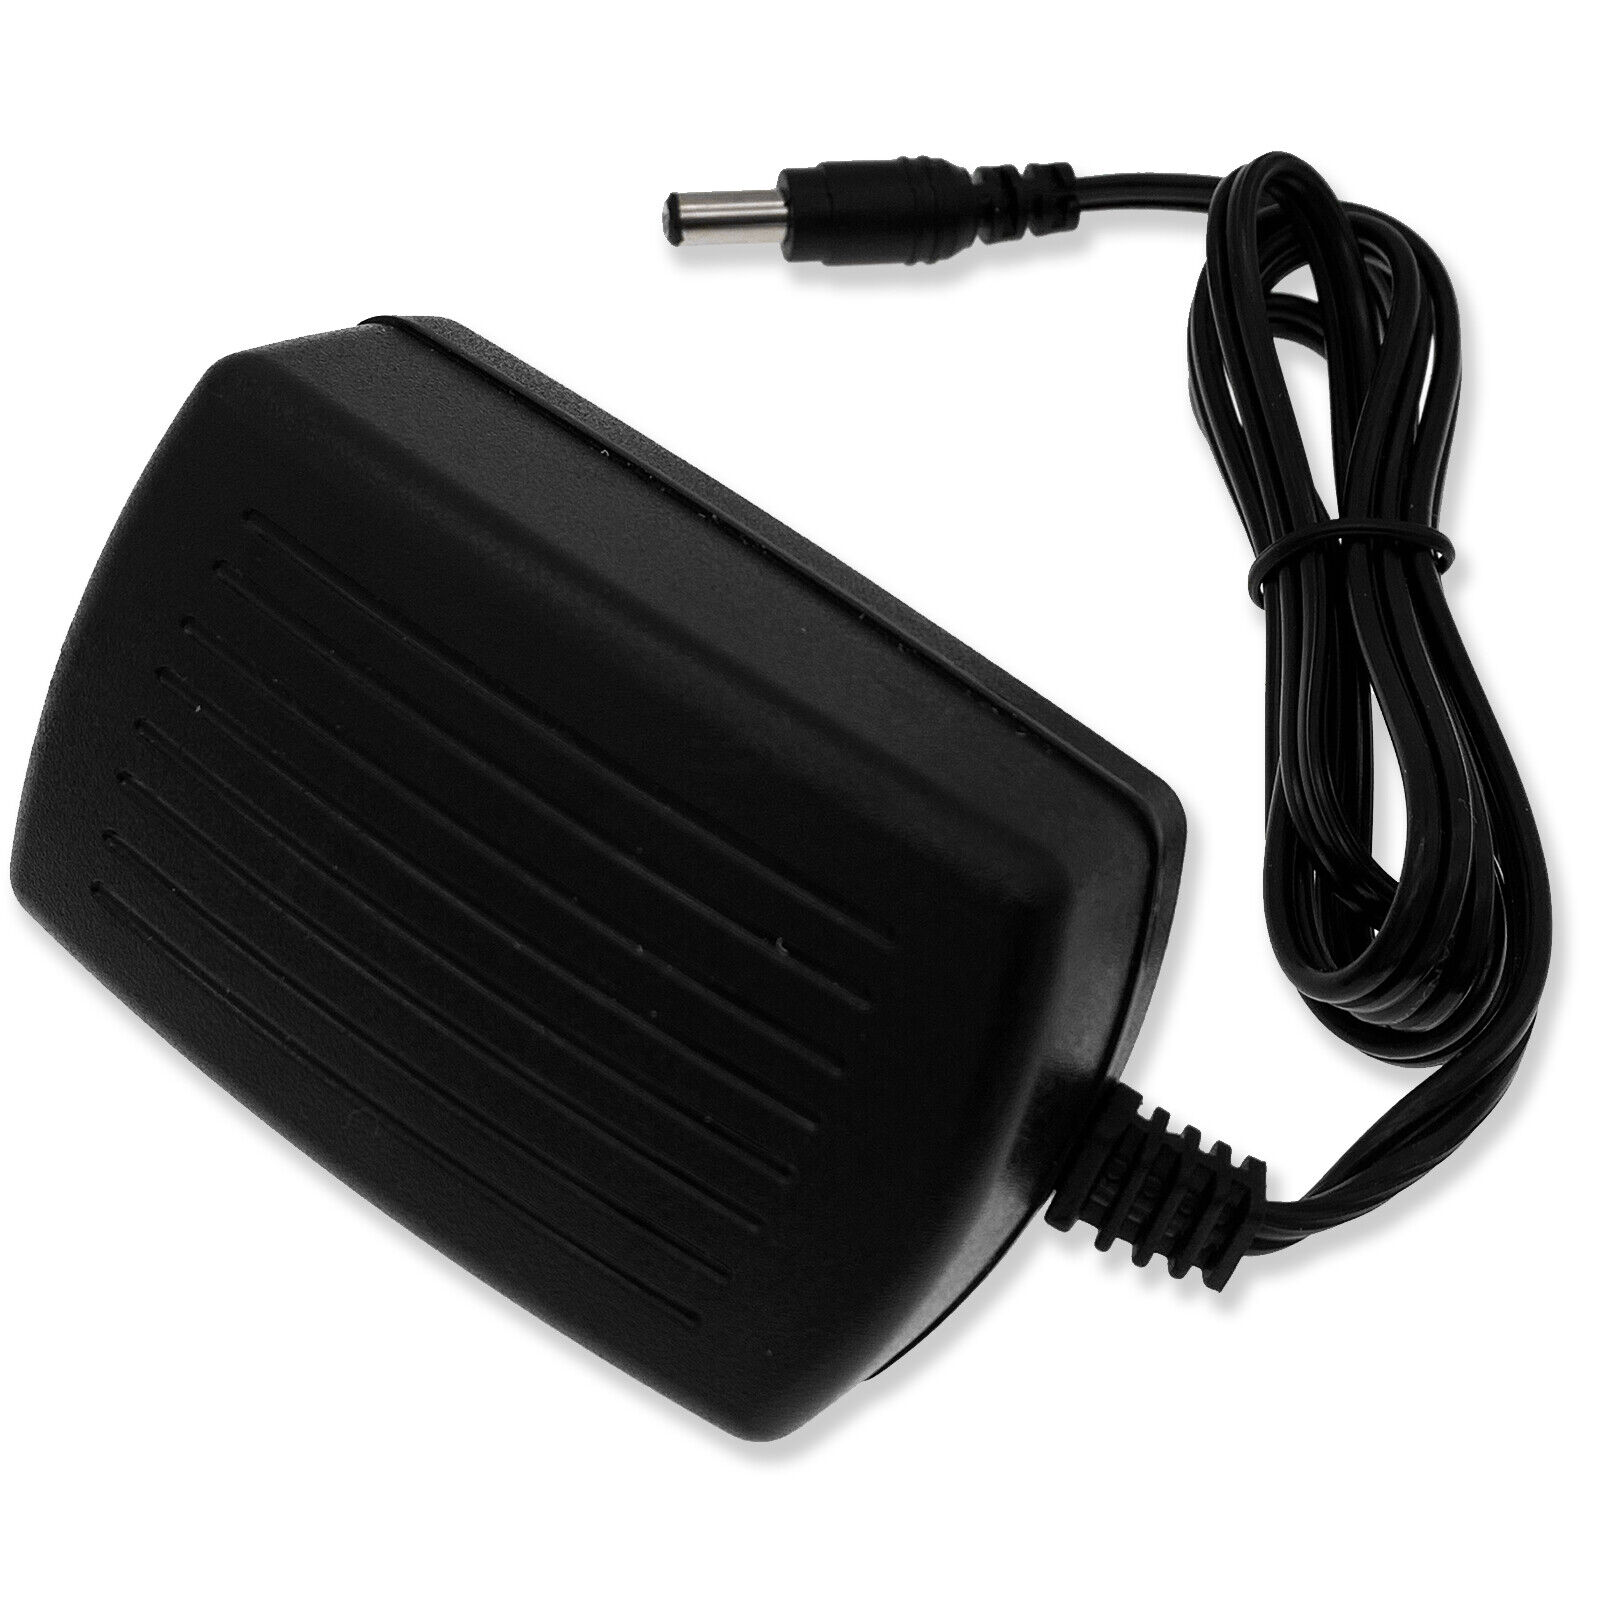 *Brand NEW* CS Model: CS-1202000 Wall Home 12V 2A AC Adapter Charger Power Supply Cord